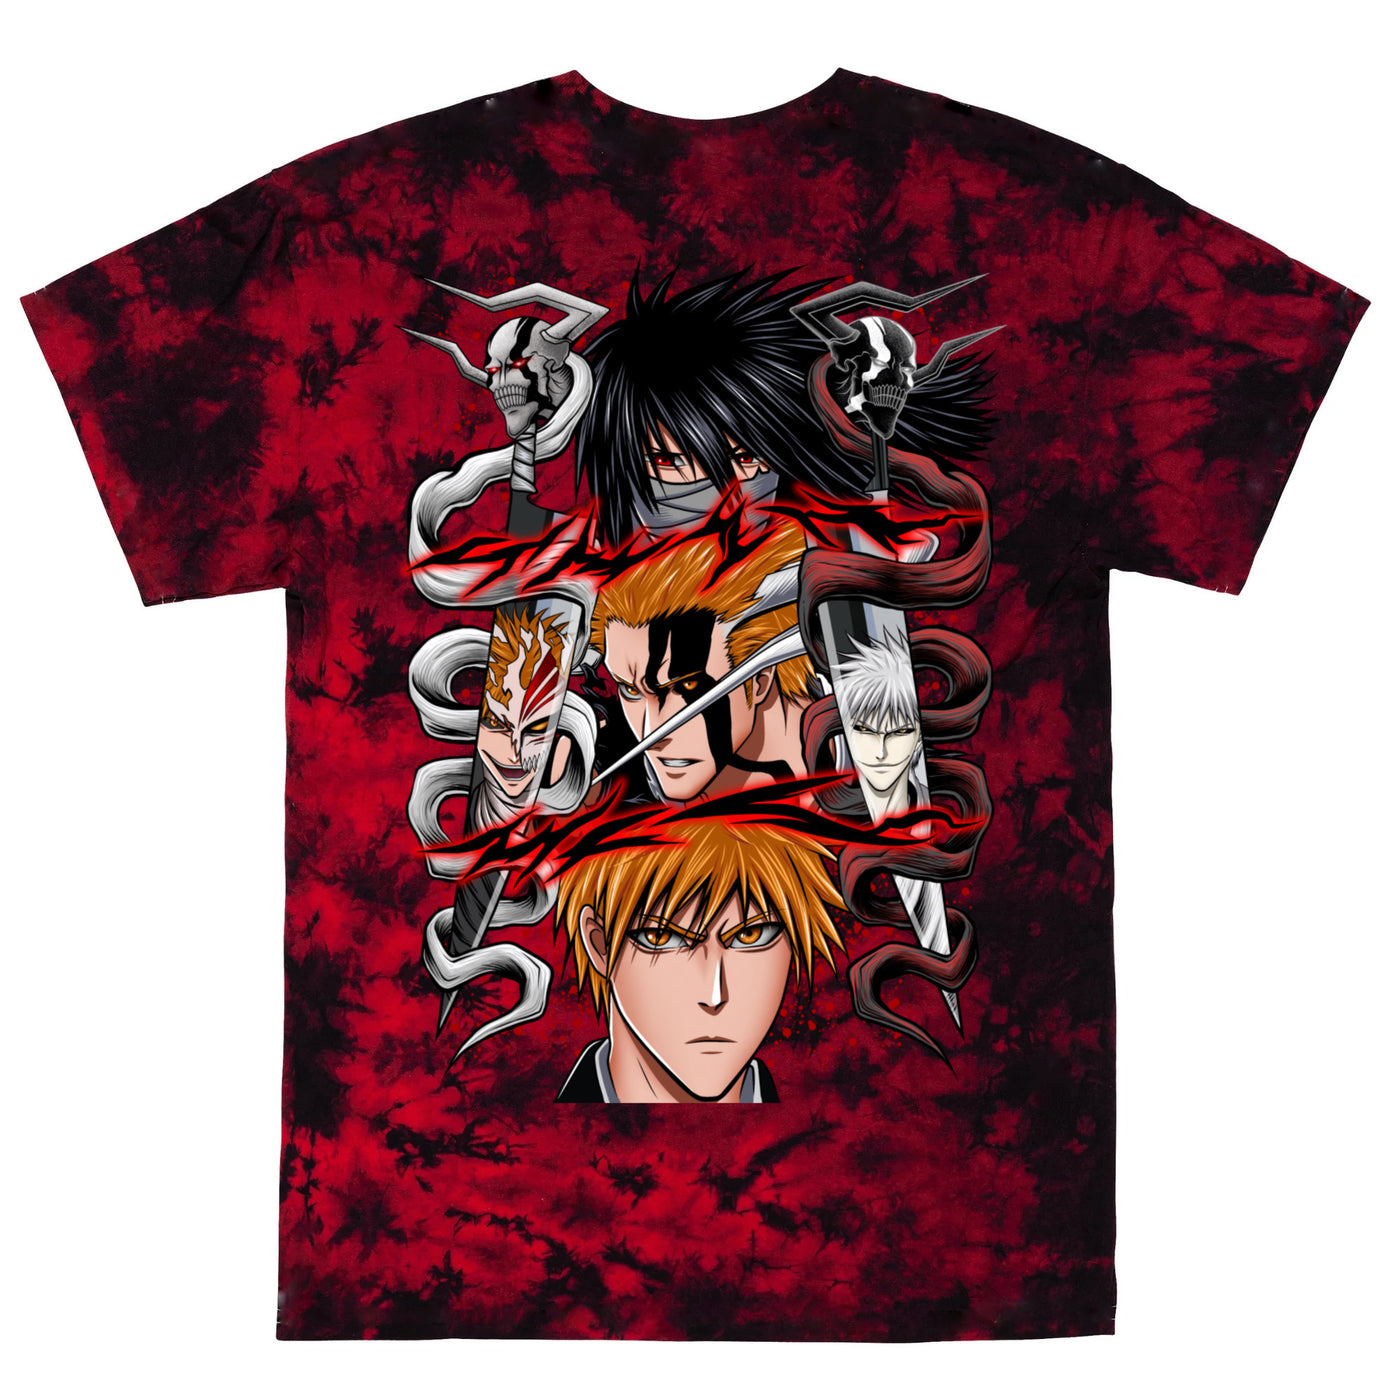 BLEACH DOUBLE SIDED TIE DYE SHIRT *SHIPS NEXT DAY ORDERED*